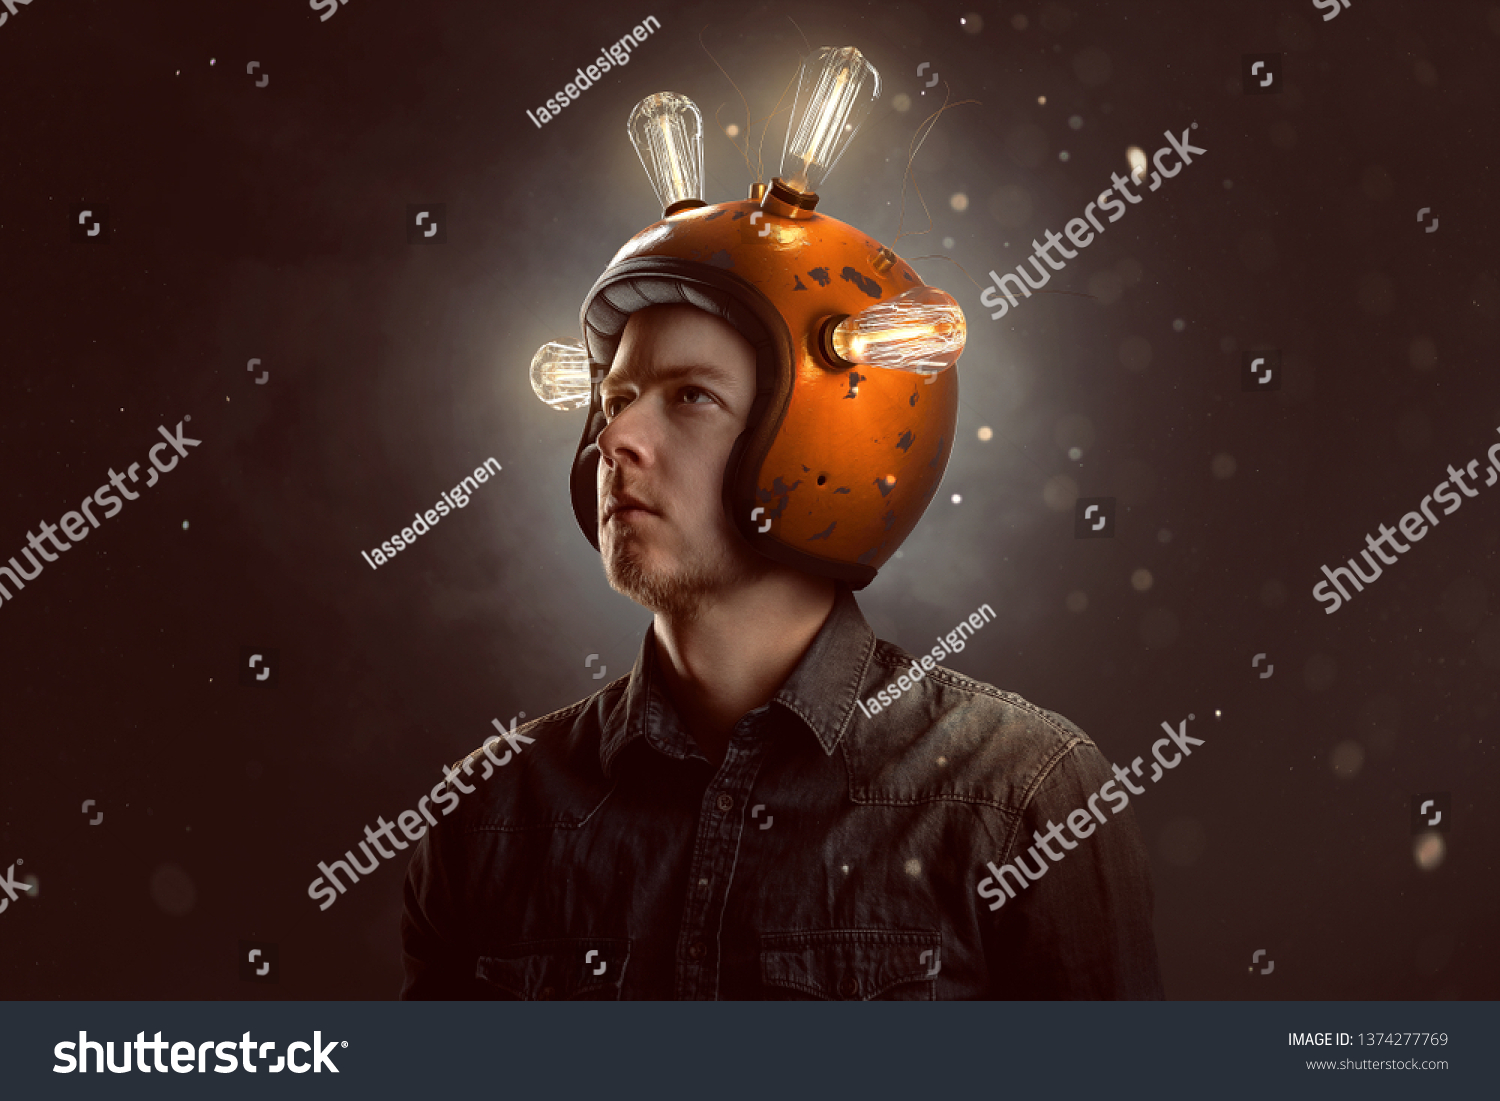 Young man with light bulb helmet #1374277769